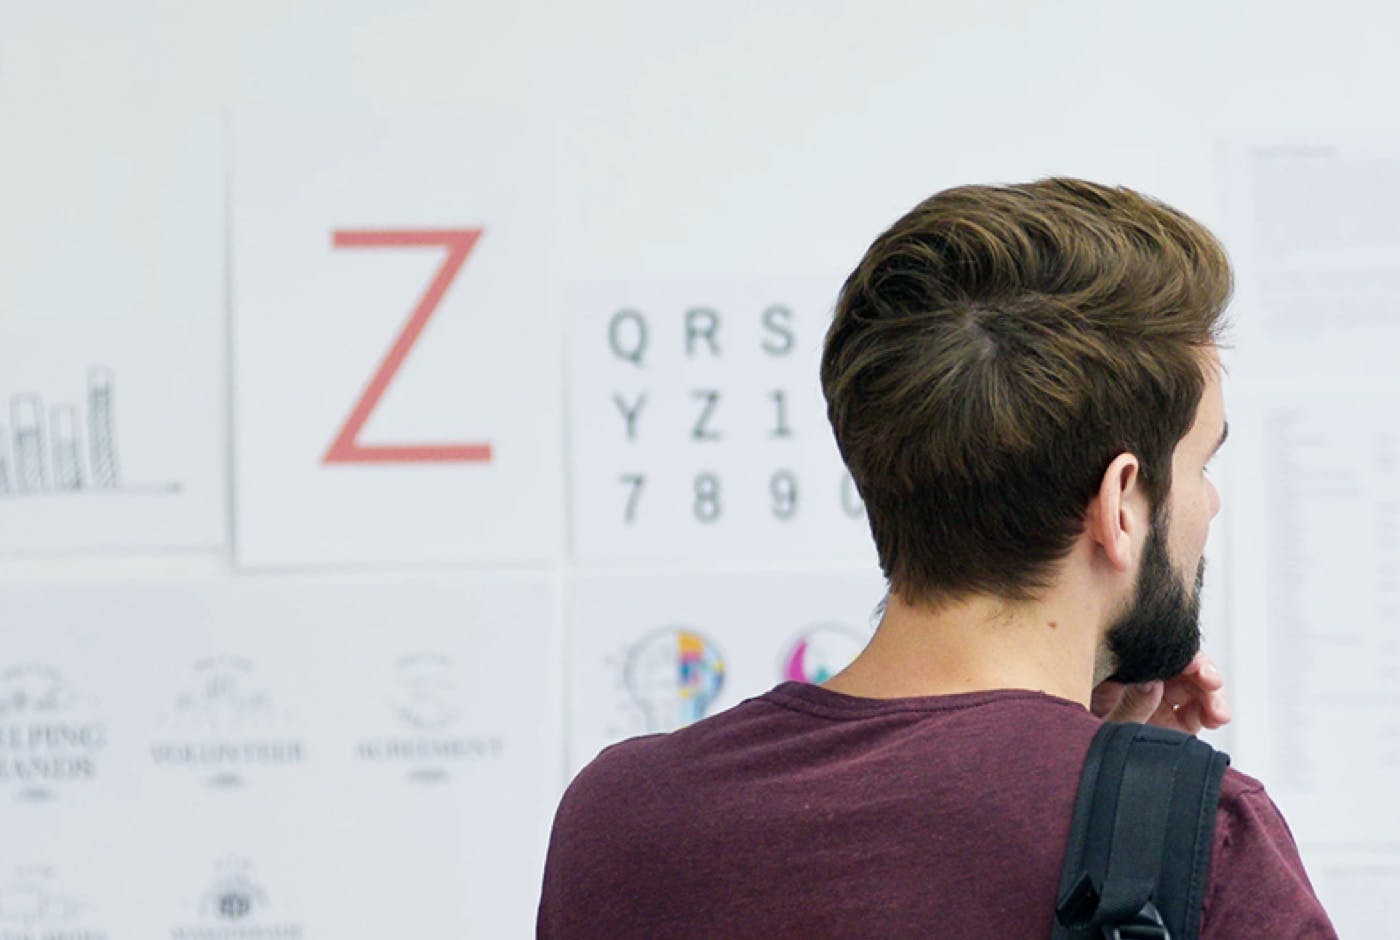 Header image of a person looking at a whiteboard